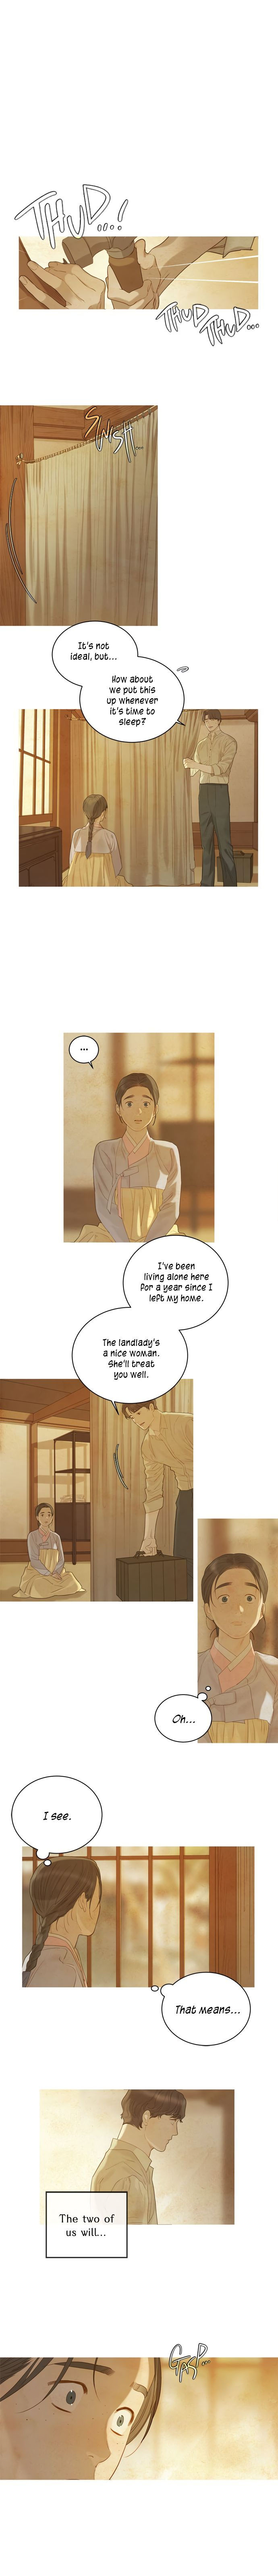 The Whale Star - The Gyeongseong Mermaid - Chapter 27 Page 2